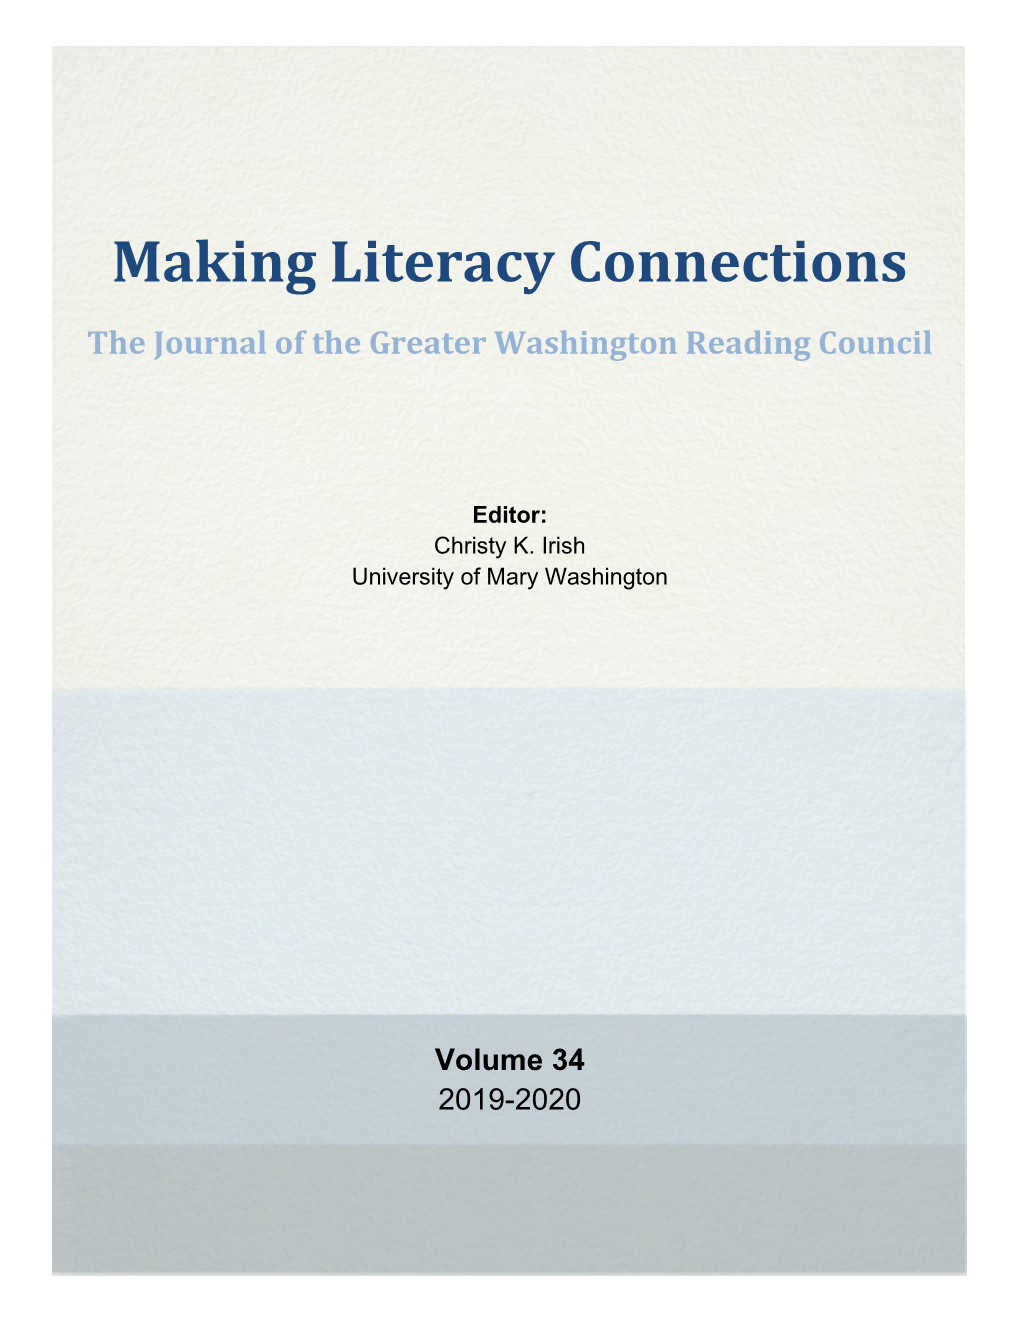 Making Literacy Connections the Journal of the Greater Washington Reading Council